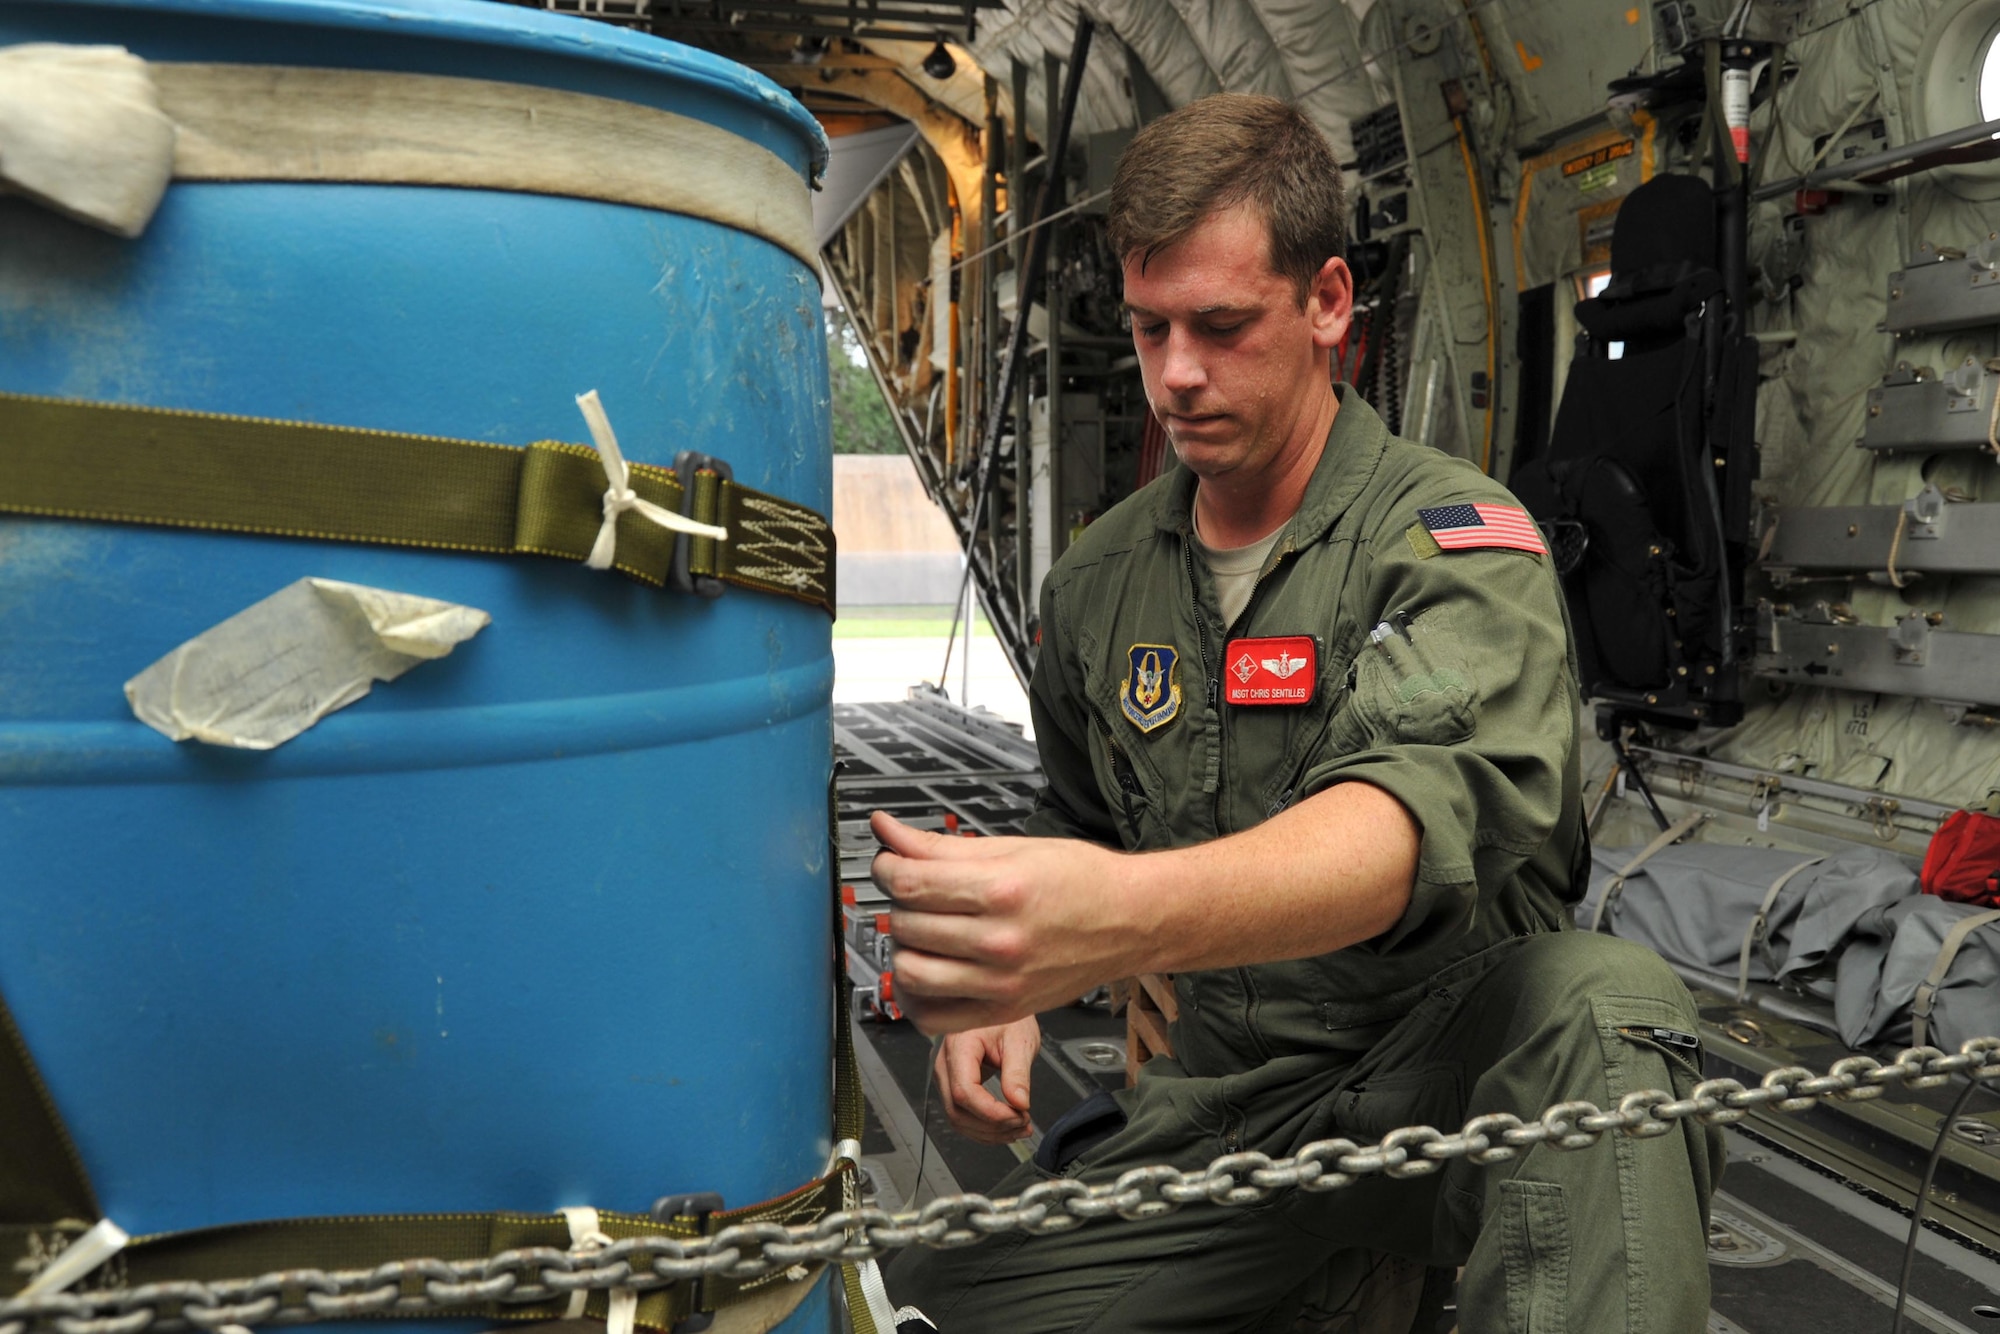 Master Sgt. Chris Sentilles, 815th Airlift Squadron loadmaster, secures a container delivery system on one of the squadron’s C-130J aircraft that took part in a four-aircraft training mission Sept. 11, 2016, over the Mississippi Gulfcoast. The aircraft took off from Keesler Air Force Base, Mississippi, and airdropped simulated cargo and heavy equipment over Stennis International Airport, Mississippi. (U.S. Air Force photo/Tech. Sgt. Ryan Labadens)